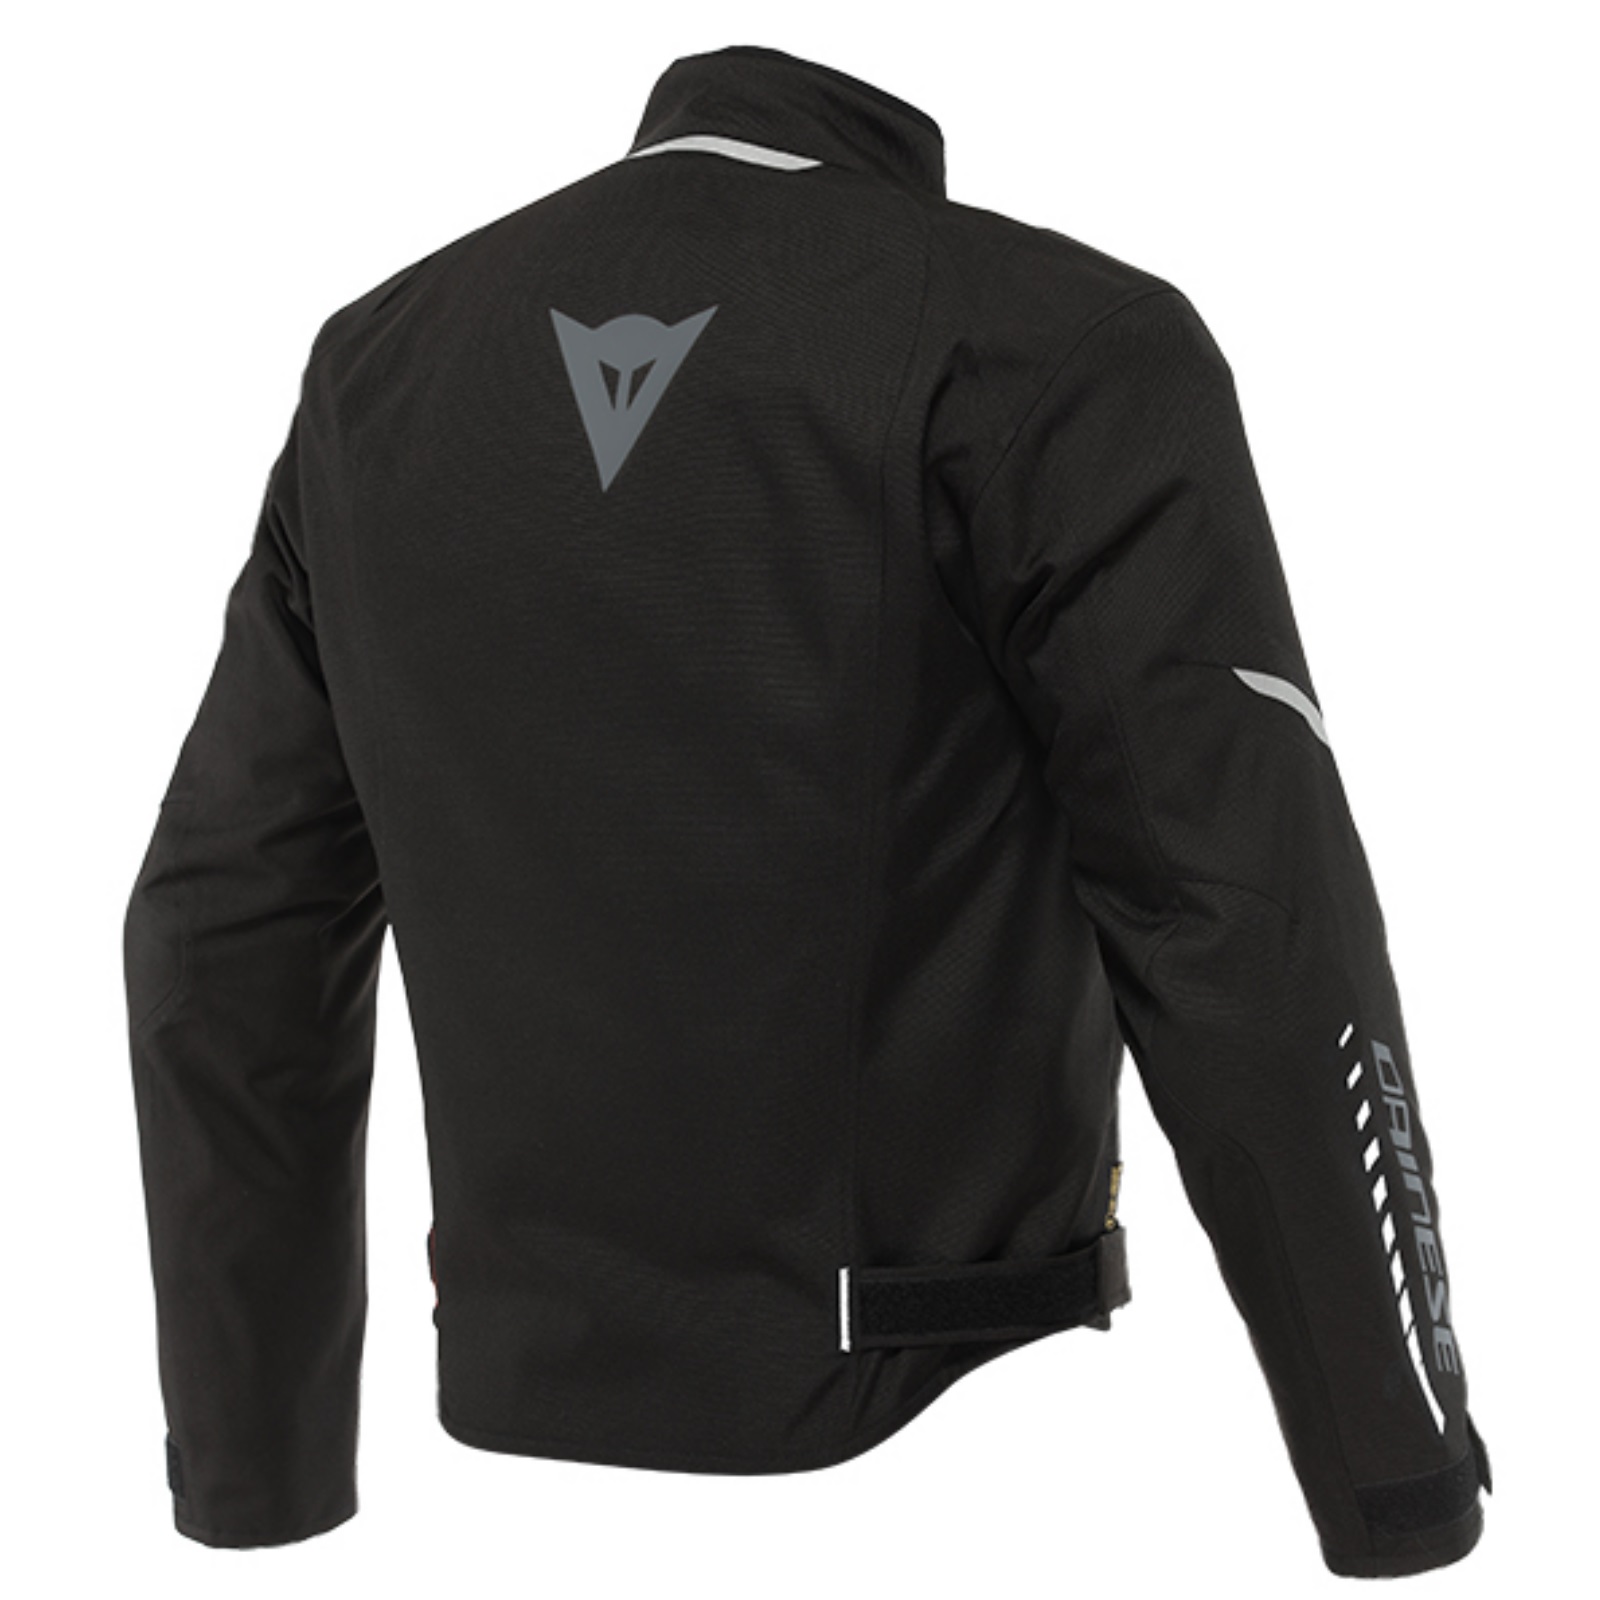 Dainese Veloce D-Dry Mens Jacket | FREE UK DELIVERY | Flexible Ways To ...